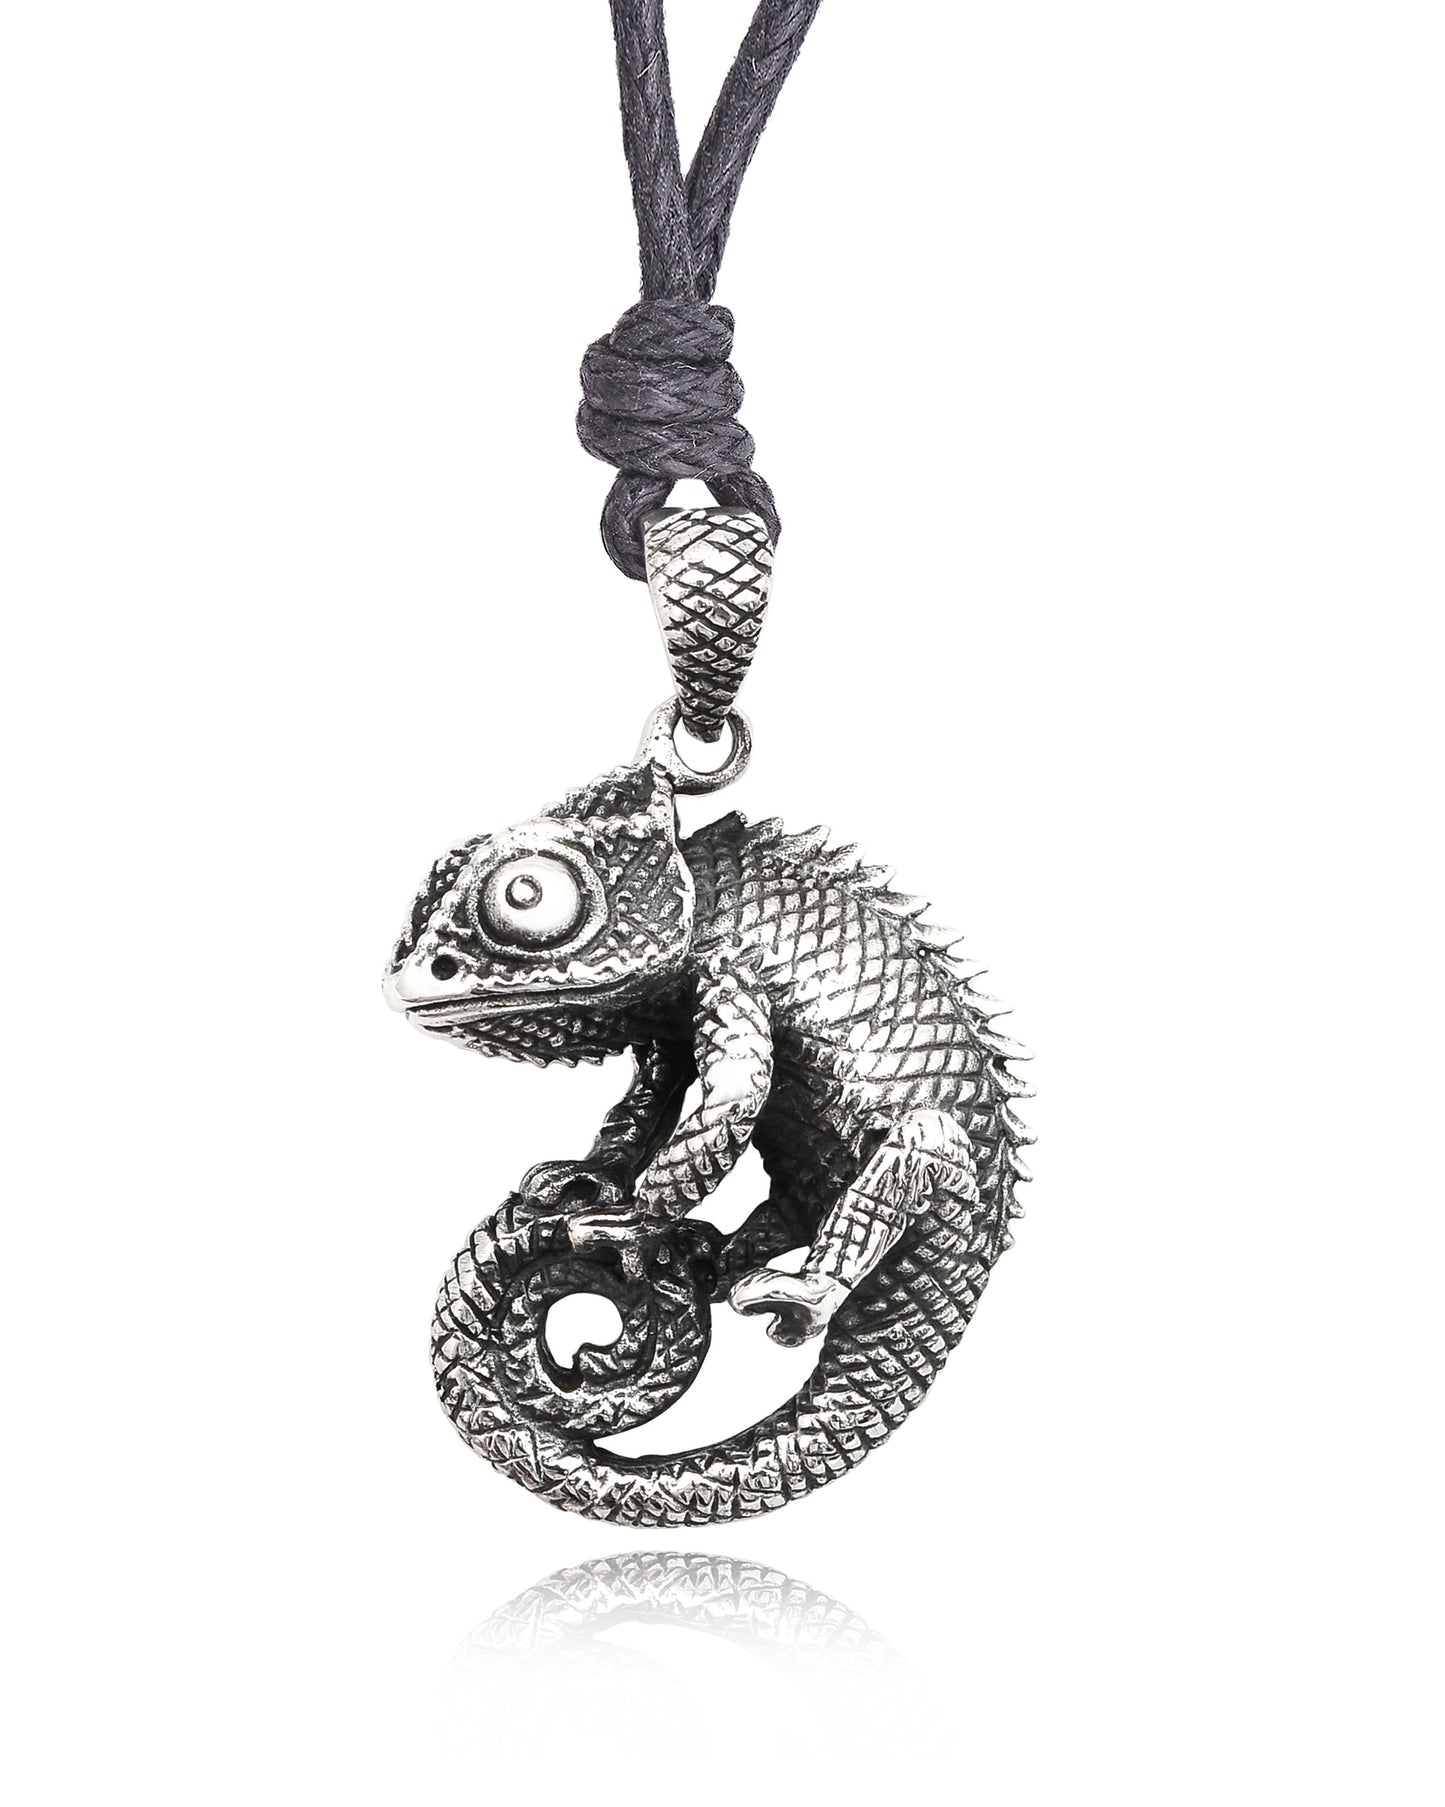 New Lizard Reptile 92.5 Sterling Silver Gold Brass Charm Necklace Pendant Jewelry